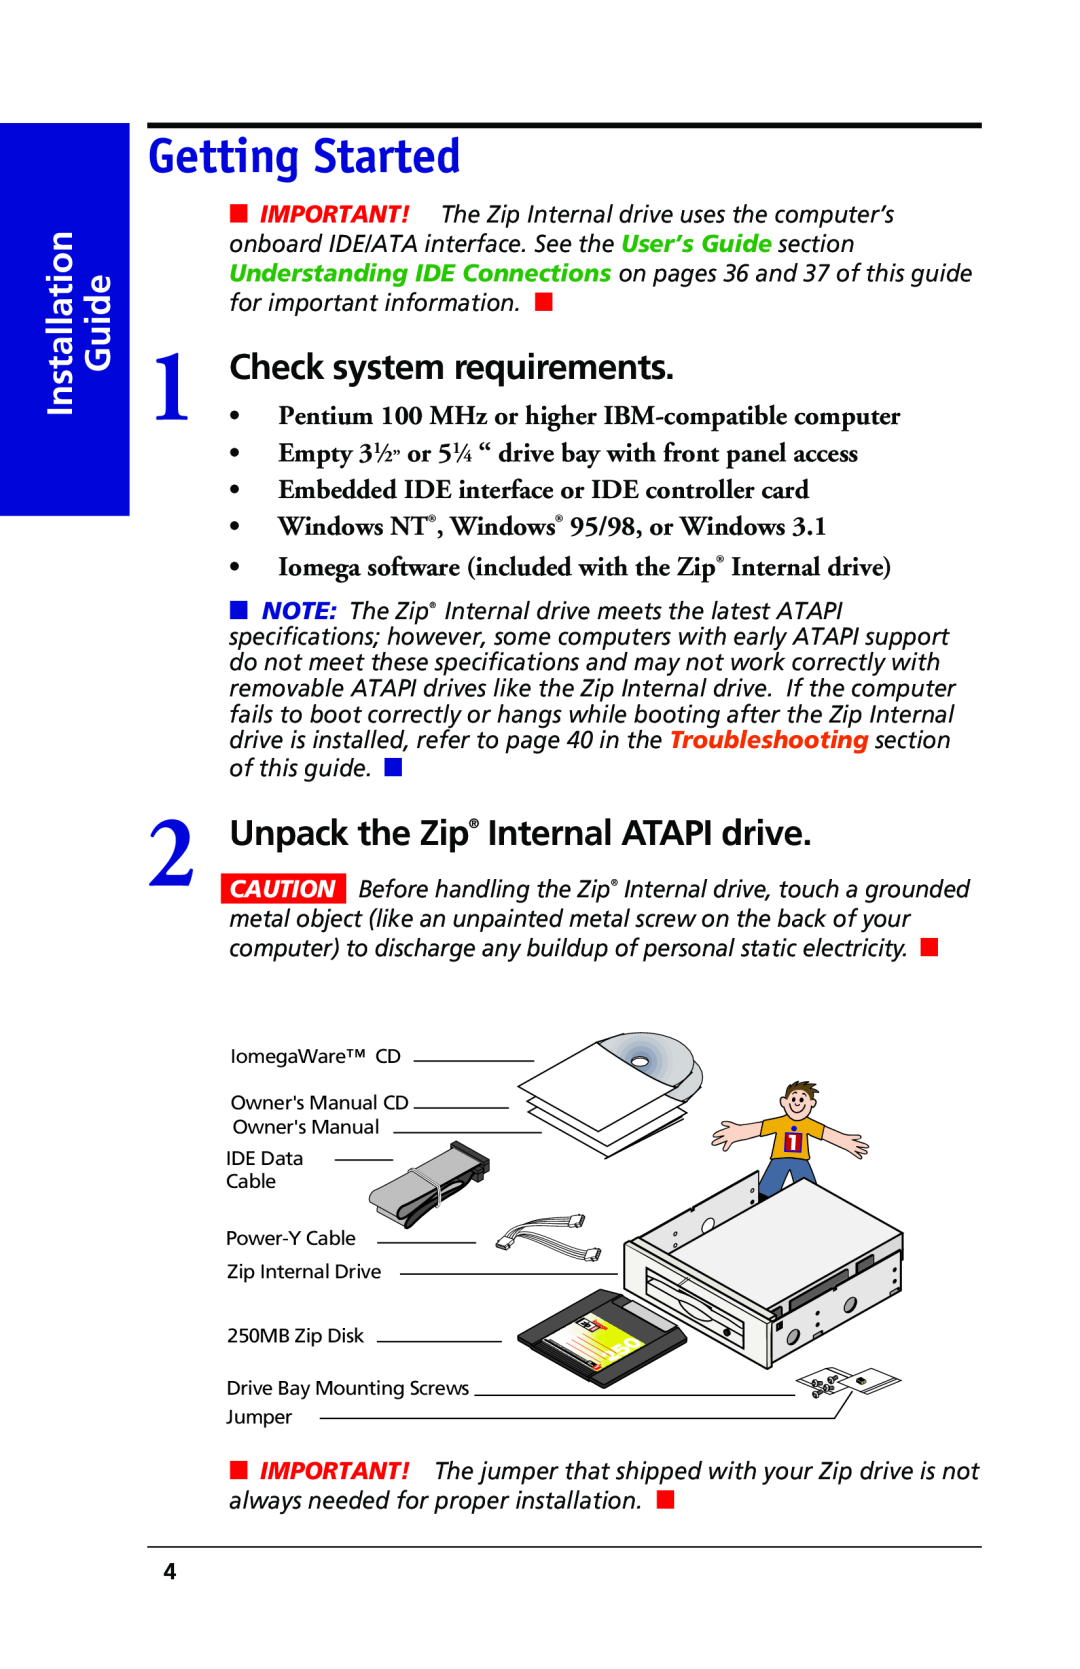 Iomega 03798300 Getting Started, Installation Guide, Check system requirements, Unpack the Zip Internal ATAPI drive 